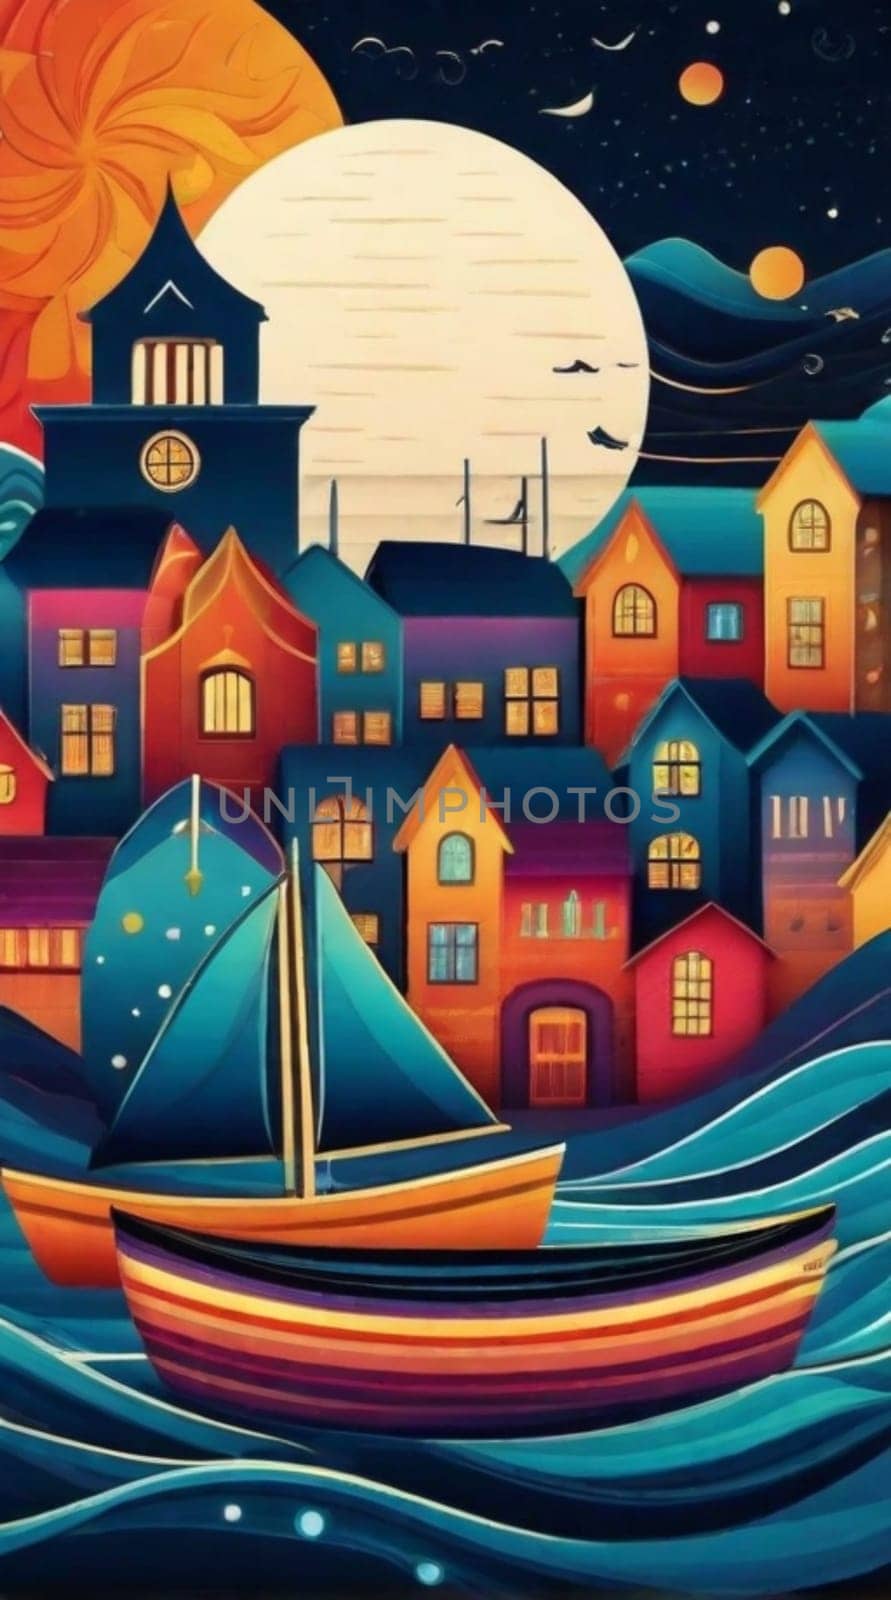 Beautiful and fantastically designed silhouettes of colorful village, houses and moon lited sky by verbano